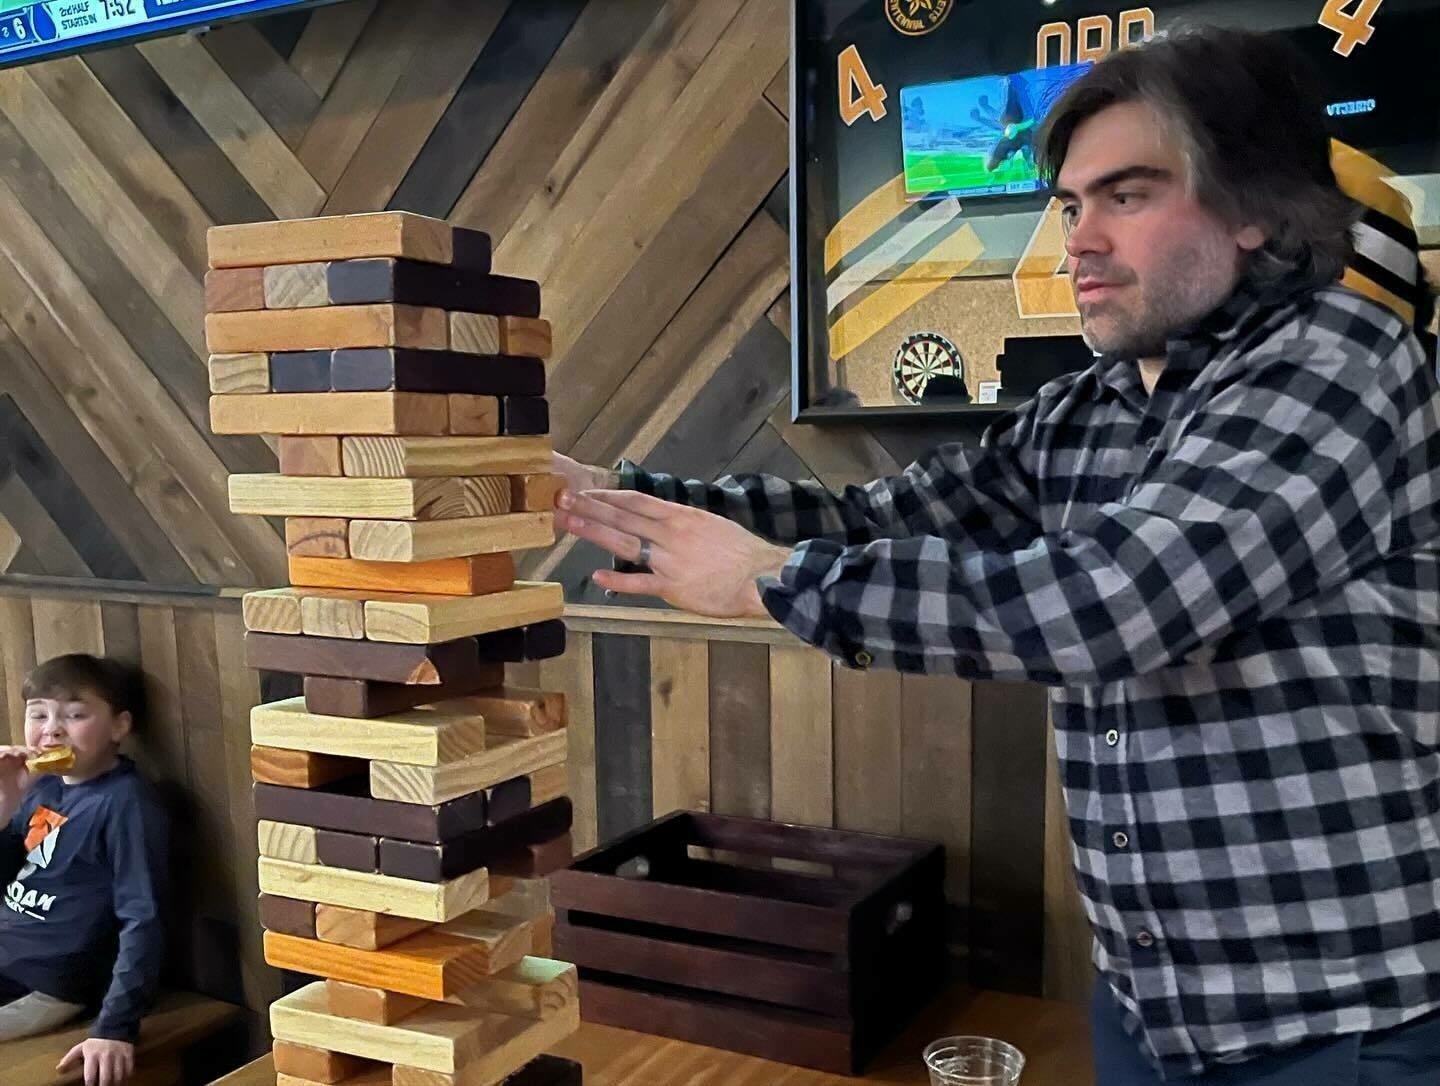 A man is carefully pulling a wooden block from a large, stacked Jenga tower in a casual indoor setting while a child, eating, watches in the background.